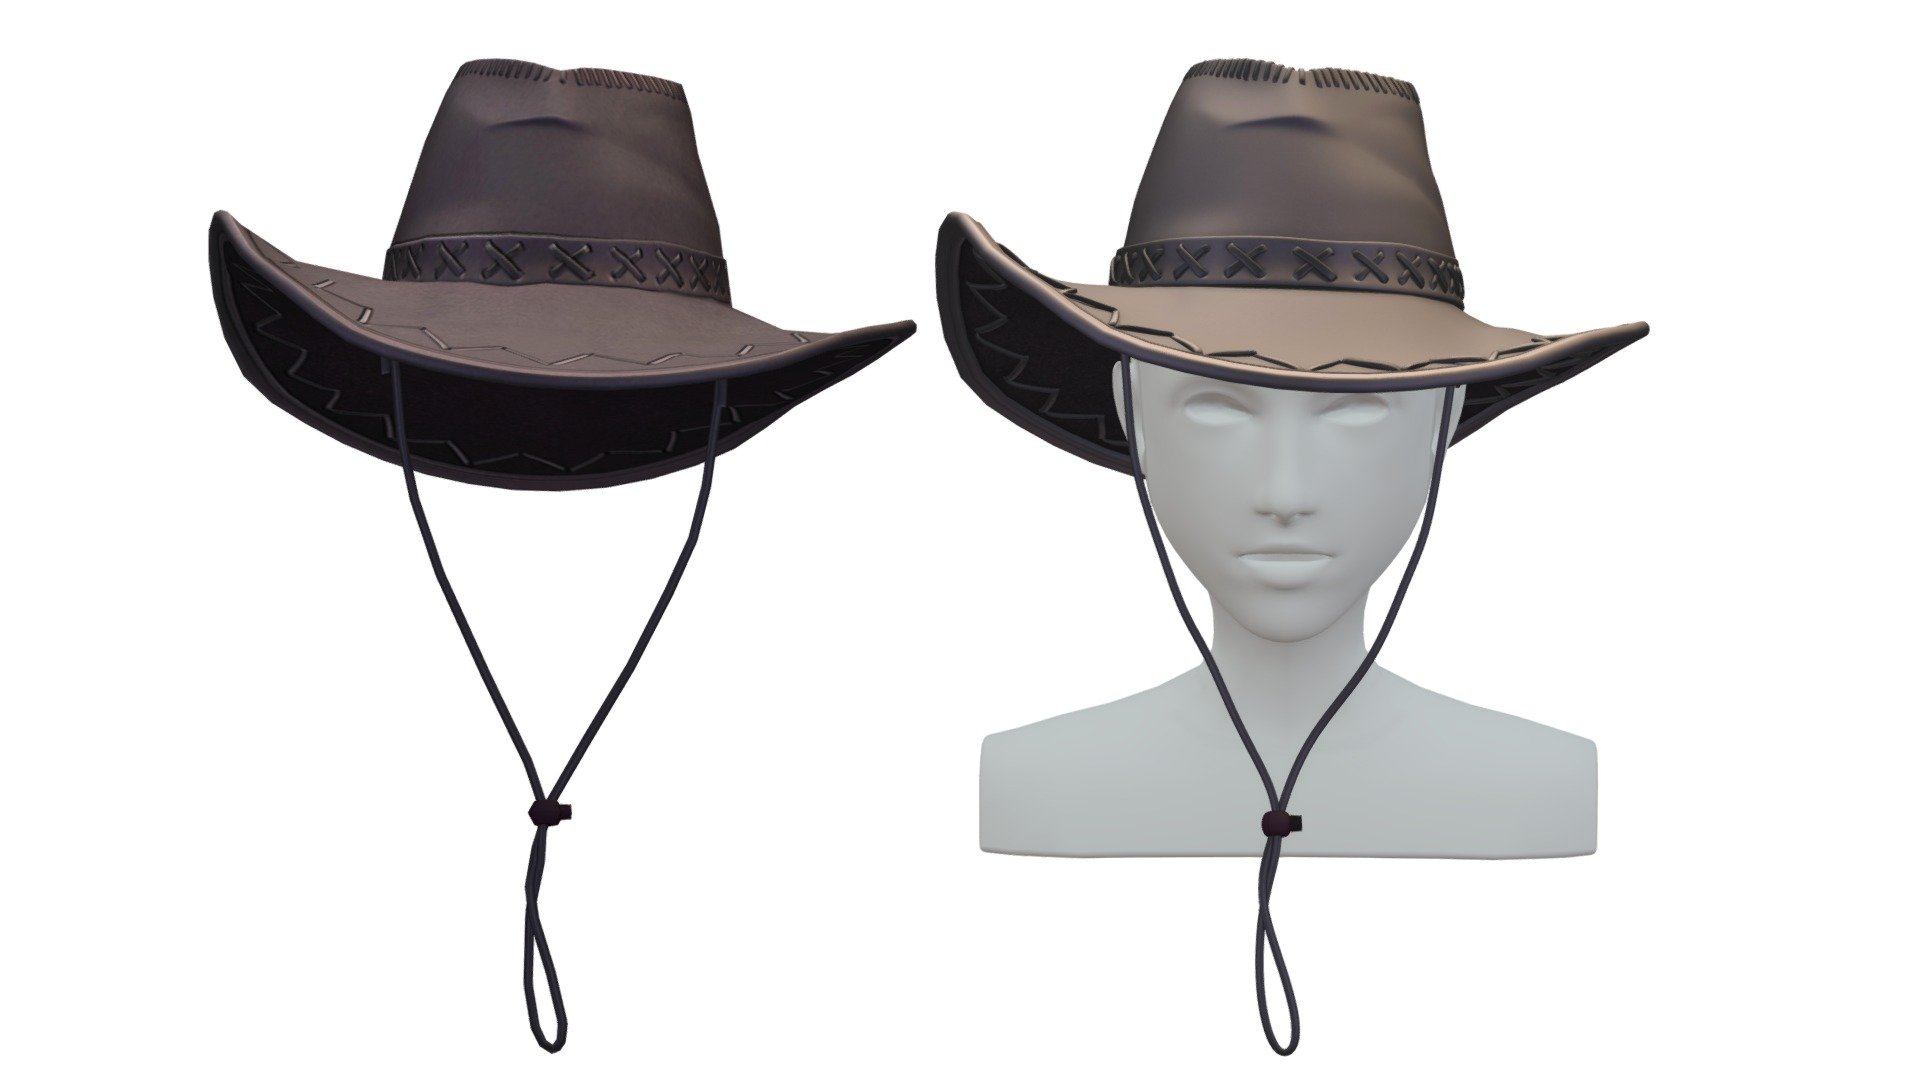 Cartoon High Poly Subdivision Cowboy Hat

No HDRI map, No Light, No material settings - only Diffuse/Color Map Texture (2048x2048)

More information about the 3D model: please use the Sketchfab Model Inspector - Key (i) - Cartoon High Poly Subdivision Cowboy Hat - Buy Royalty Free 3D model by Oleg Shuldiakov (@olegshuldiakov) 3d model